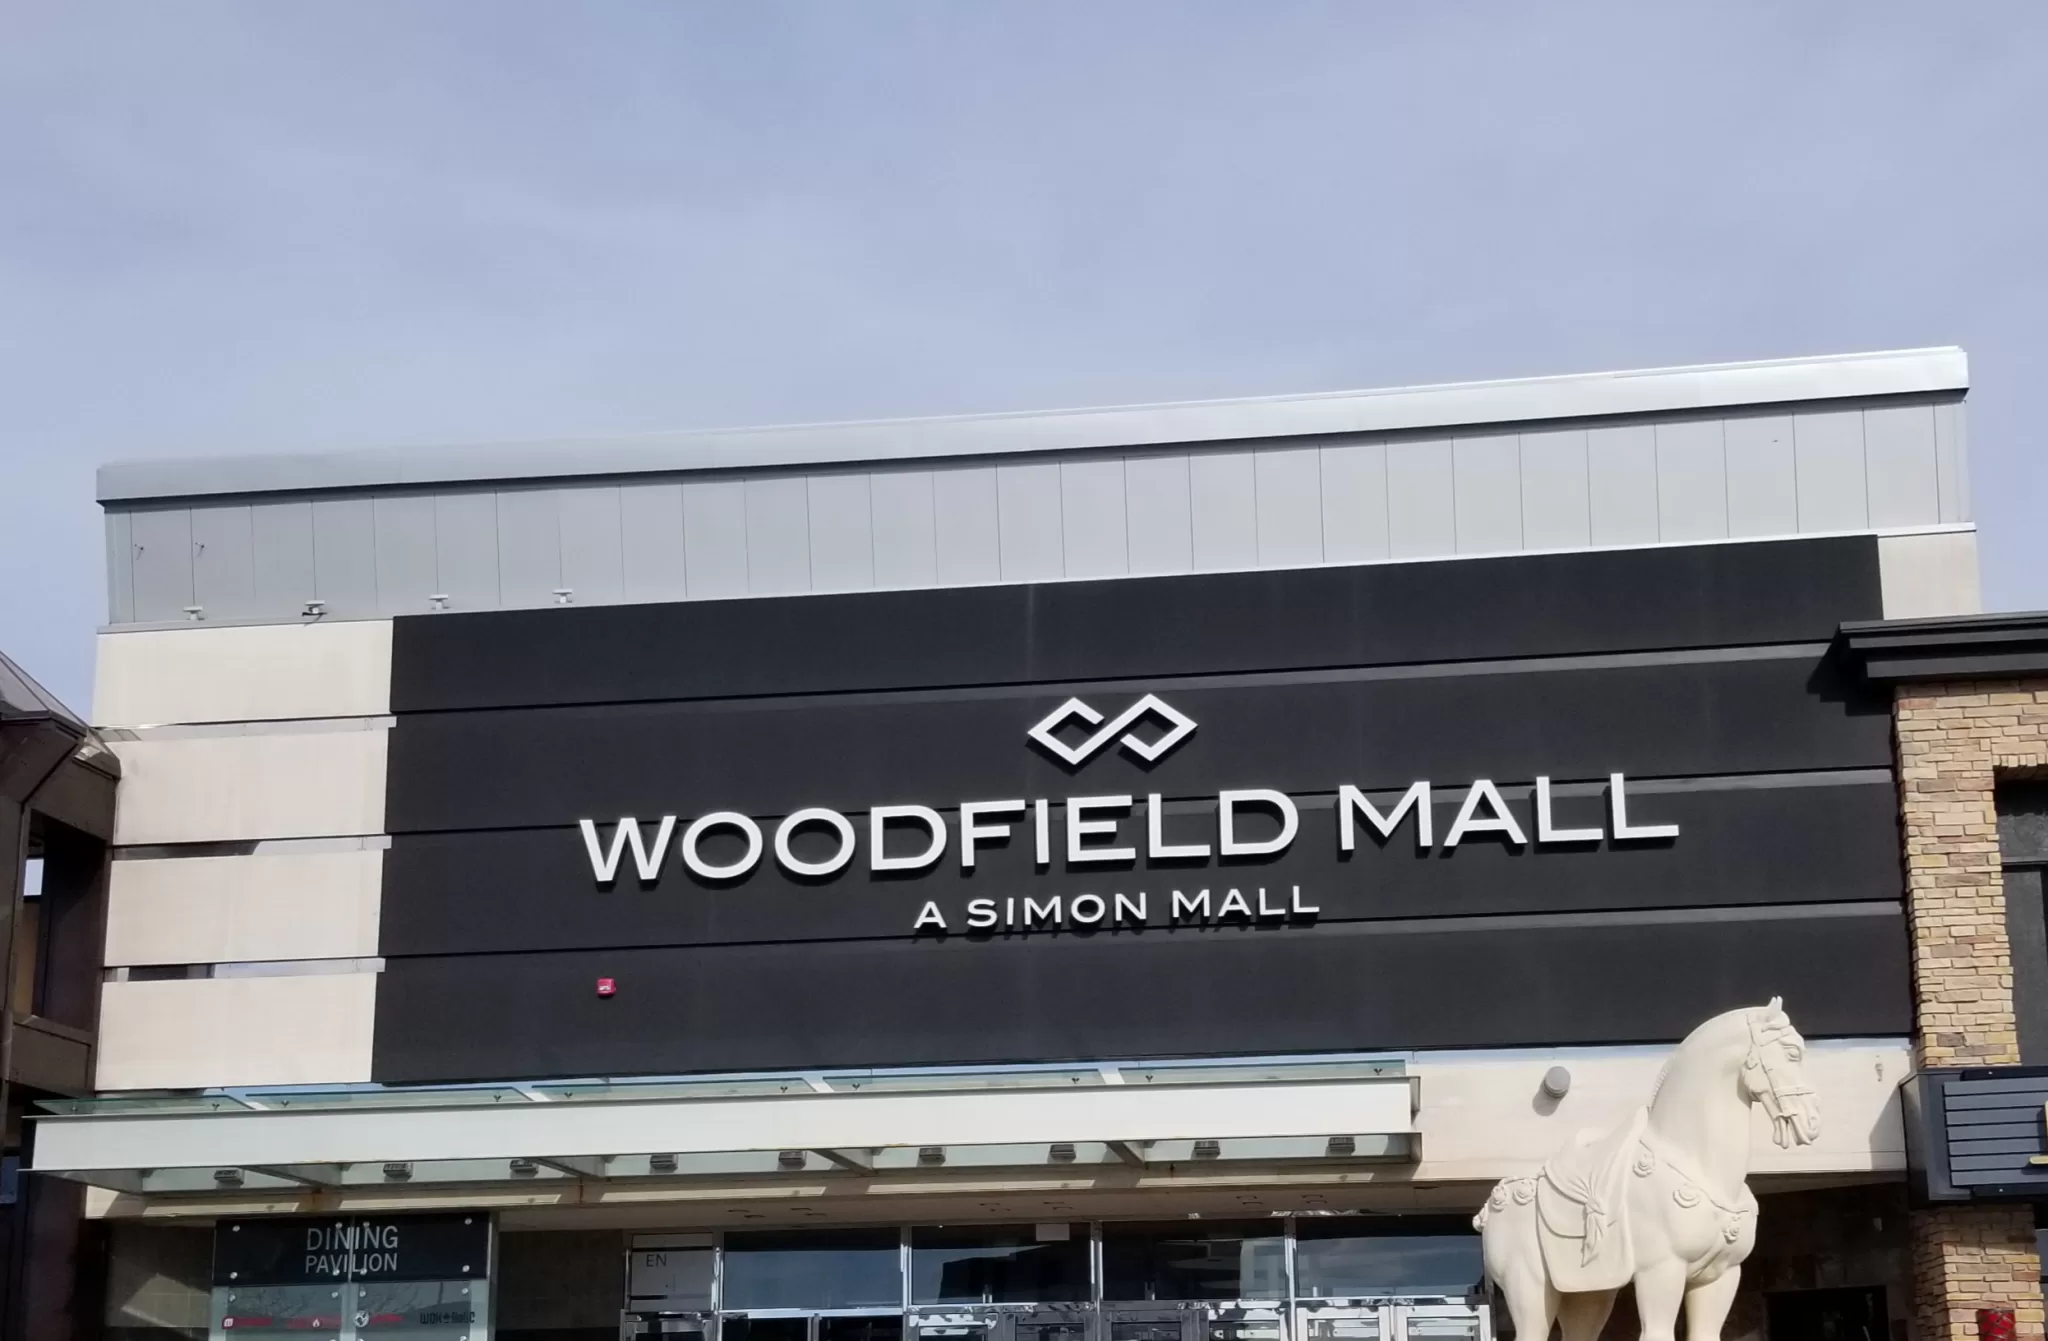 Woodfield Mall Entrance located in Schaumburg